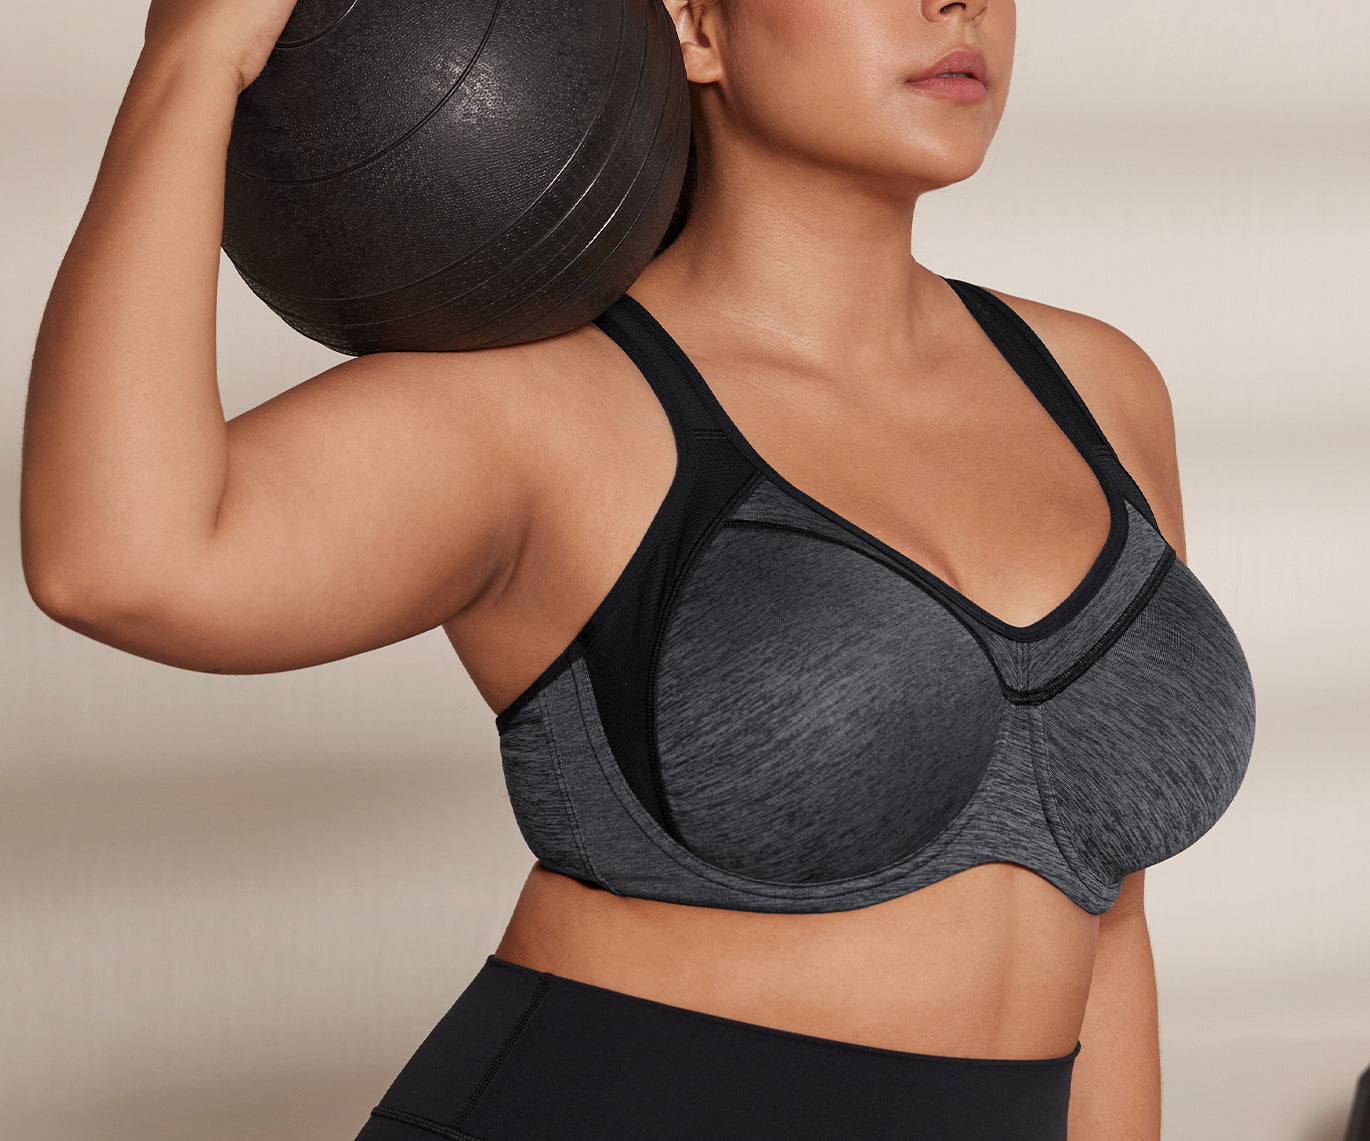 Details of our best-seller Minimizer Bra🖤 Supports sizes up to H cup⁠ ⁠  Shop this bra at the link in the bio or visit delimira.com